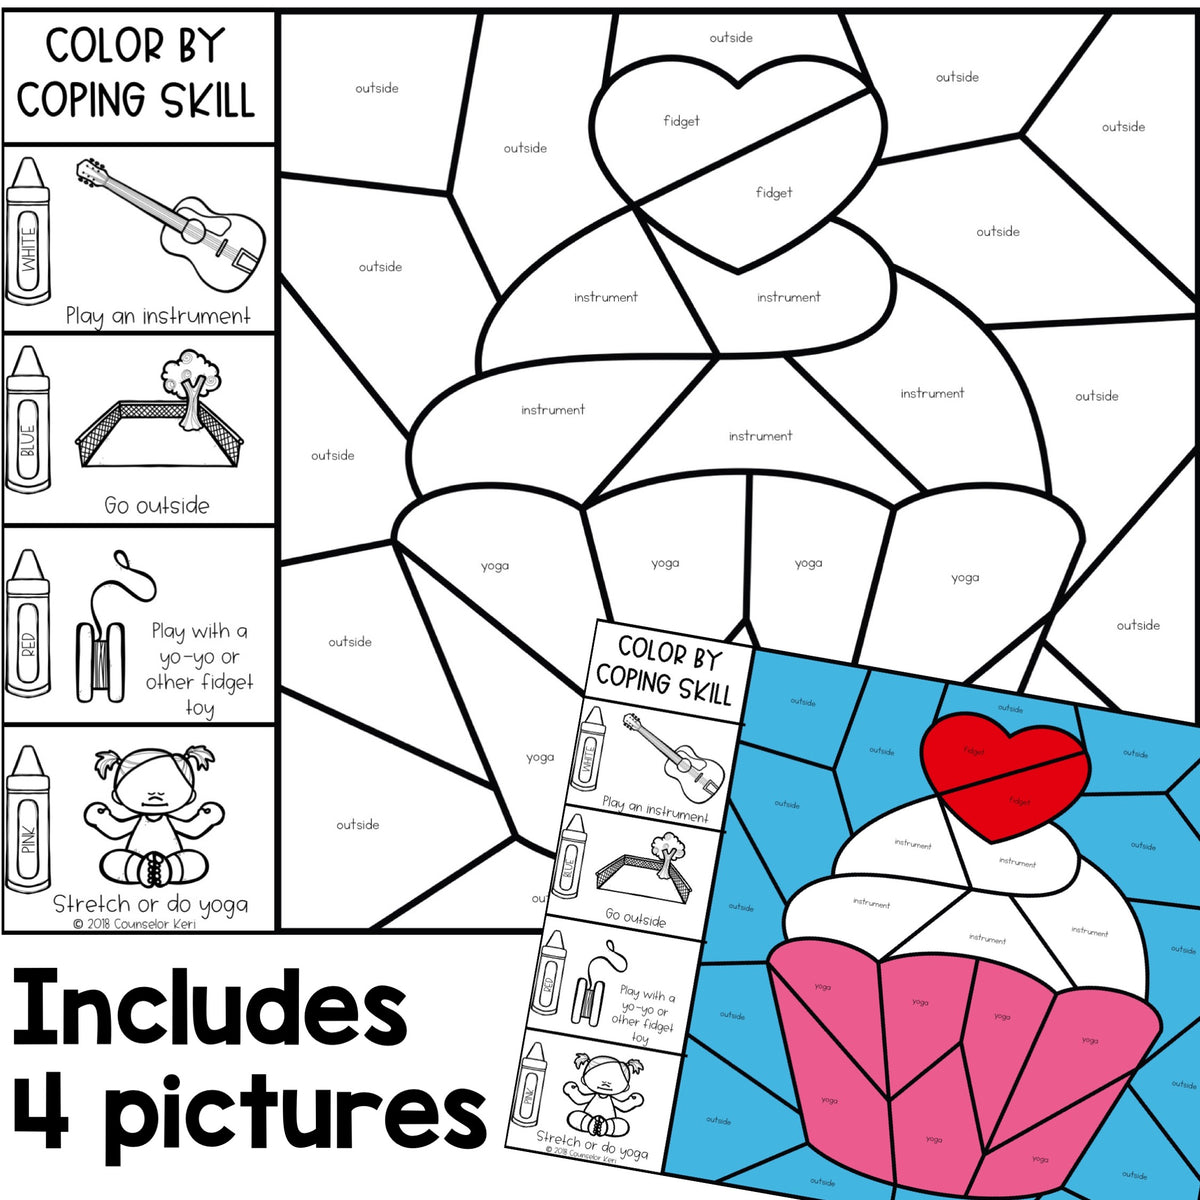 color-by-coping-skills-valentine-s-day-activity-for-elementary-school-counselor-keri